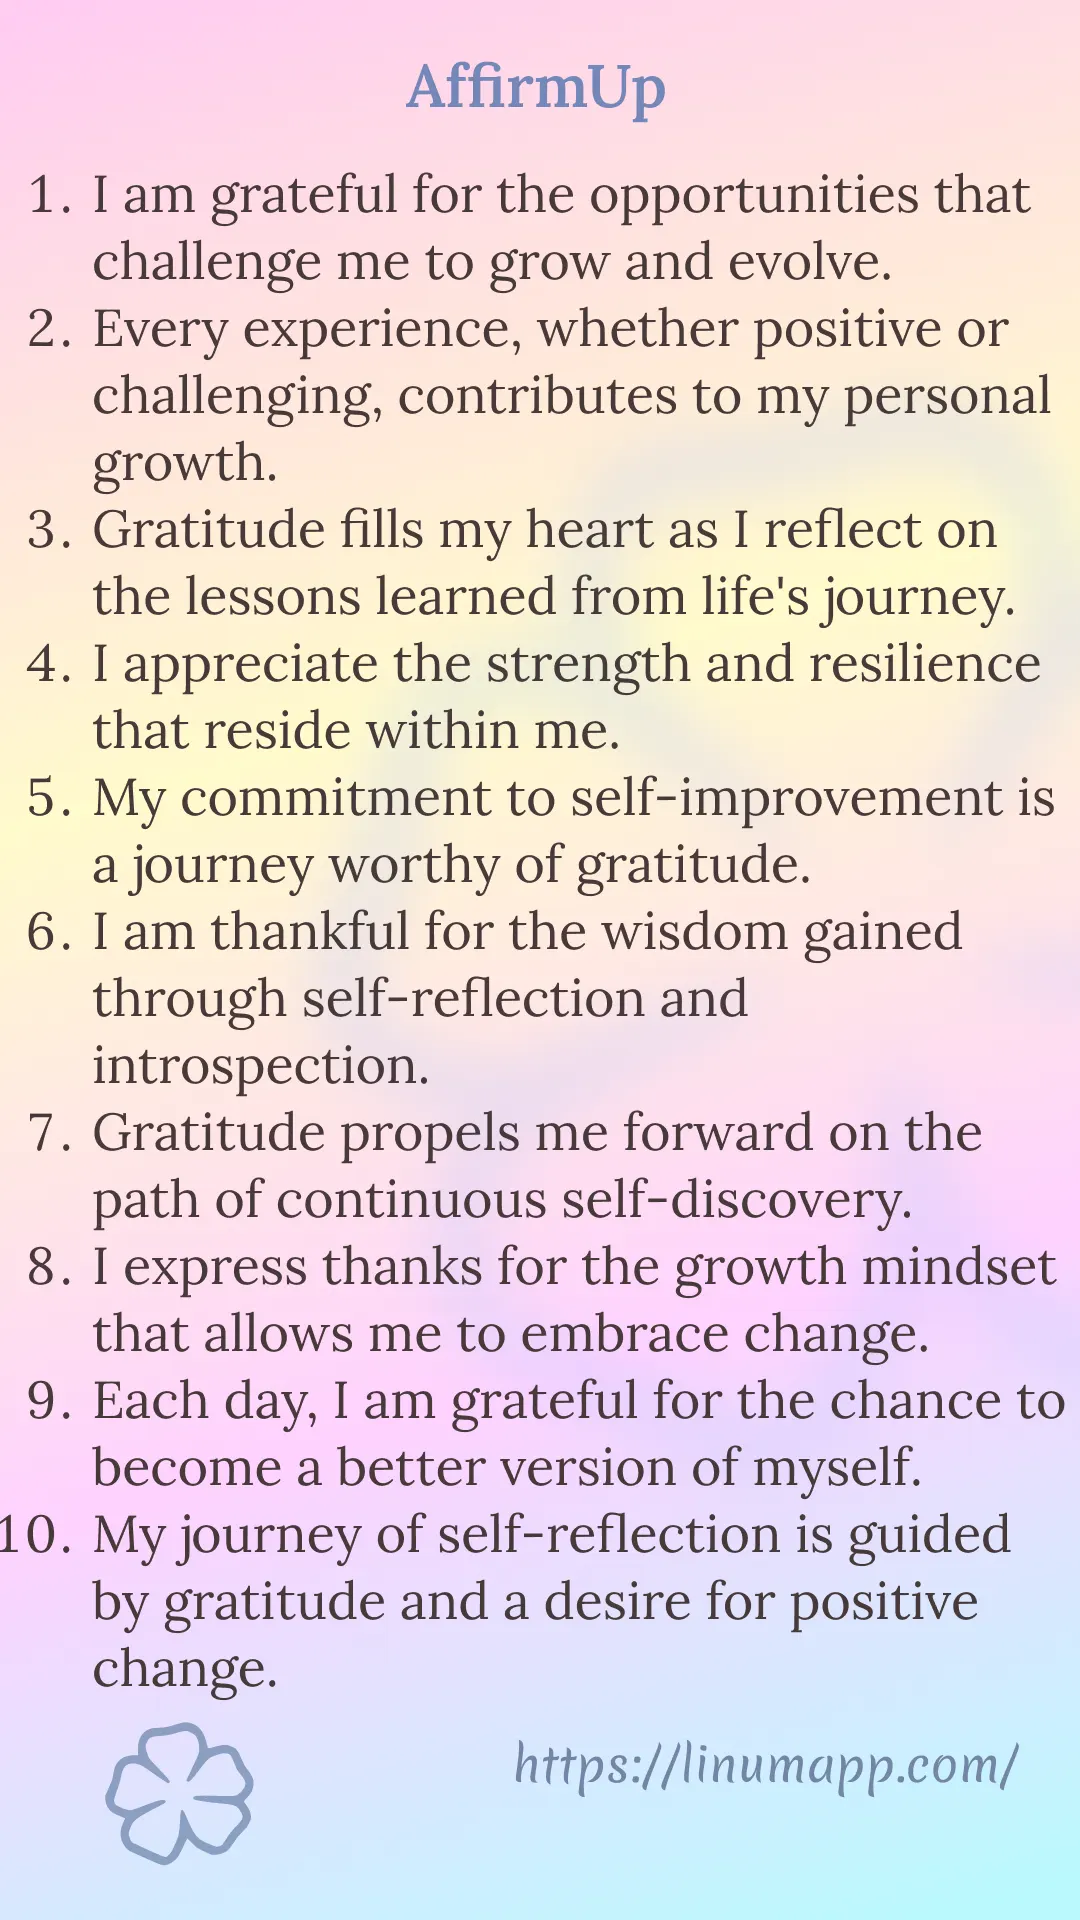 Gratitude Affirmations for Personal Growth and Self-Reflection